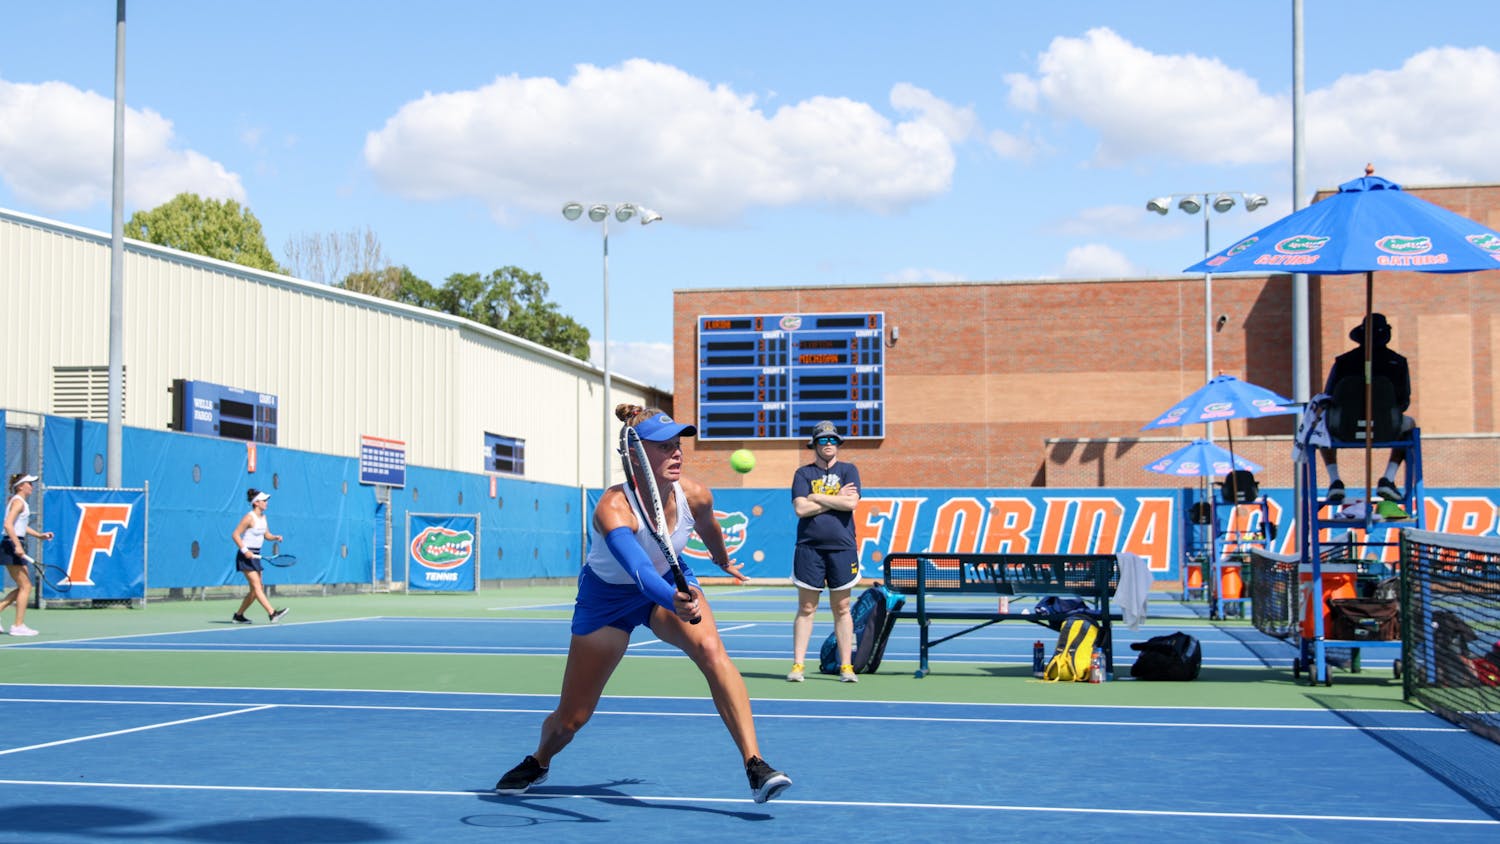 Florida sophomore Bente Spee competes in her doubles match during the Gators' 4-1 win over the Michigan Wolverines Wednesday, March 22, 2023.